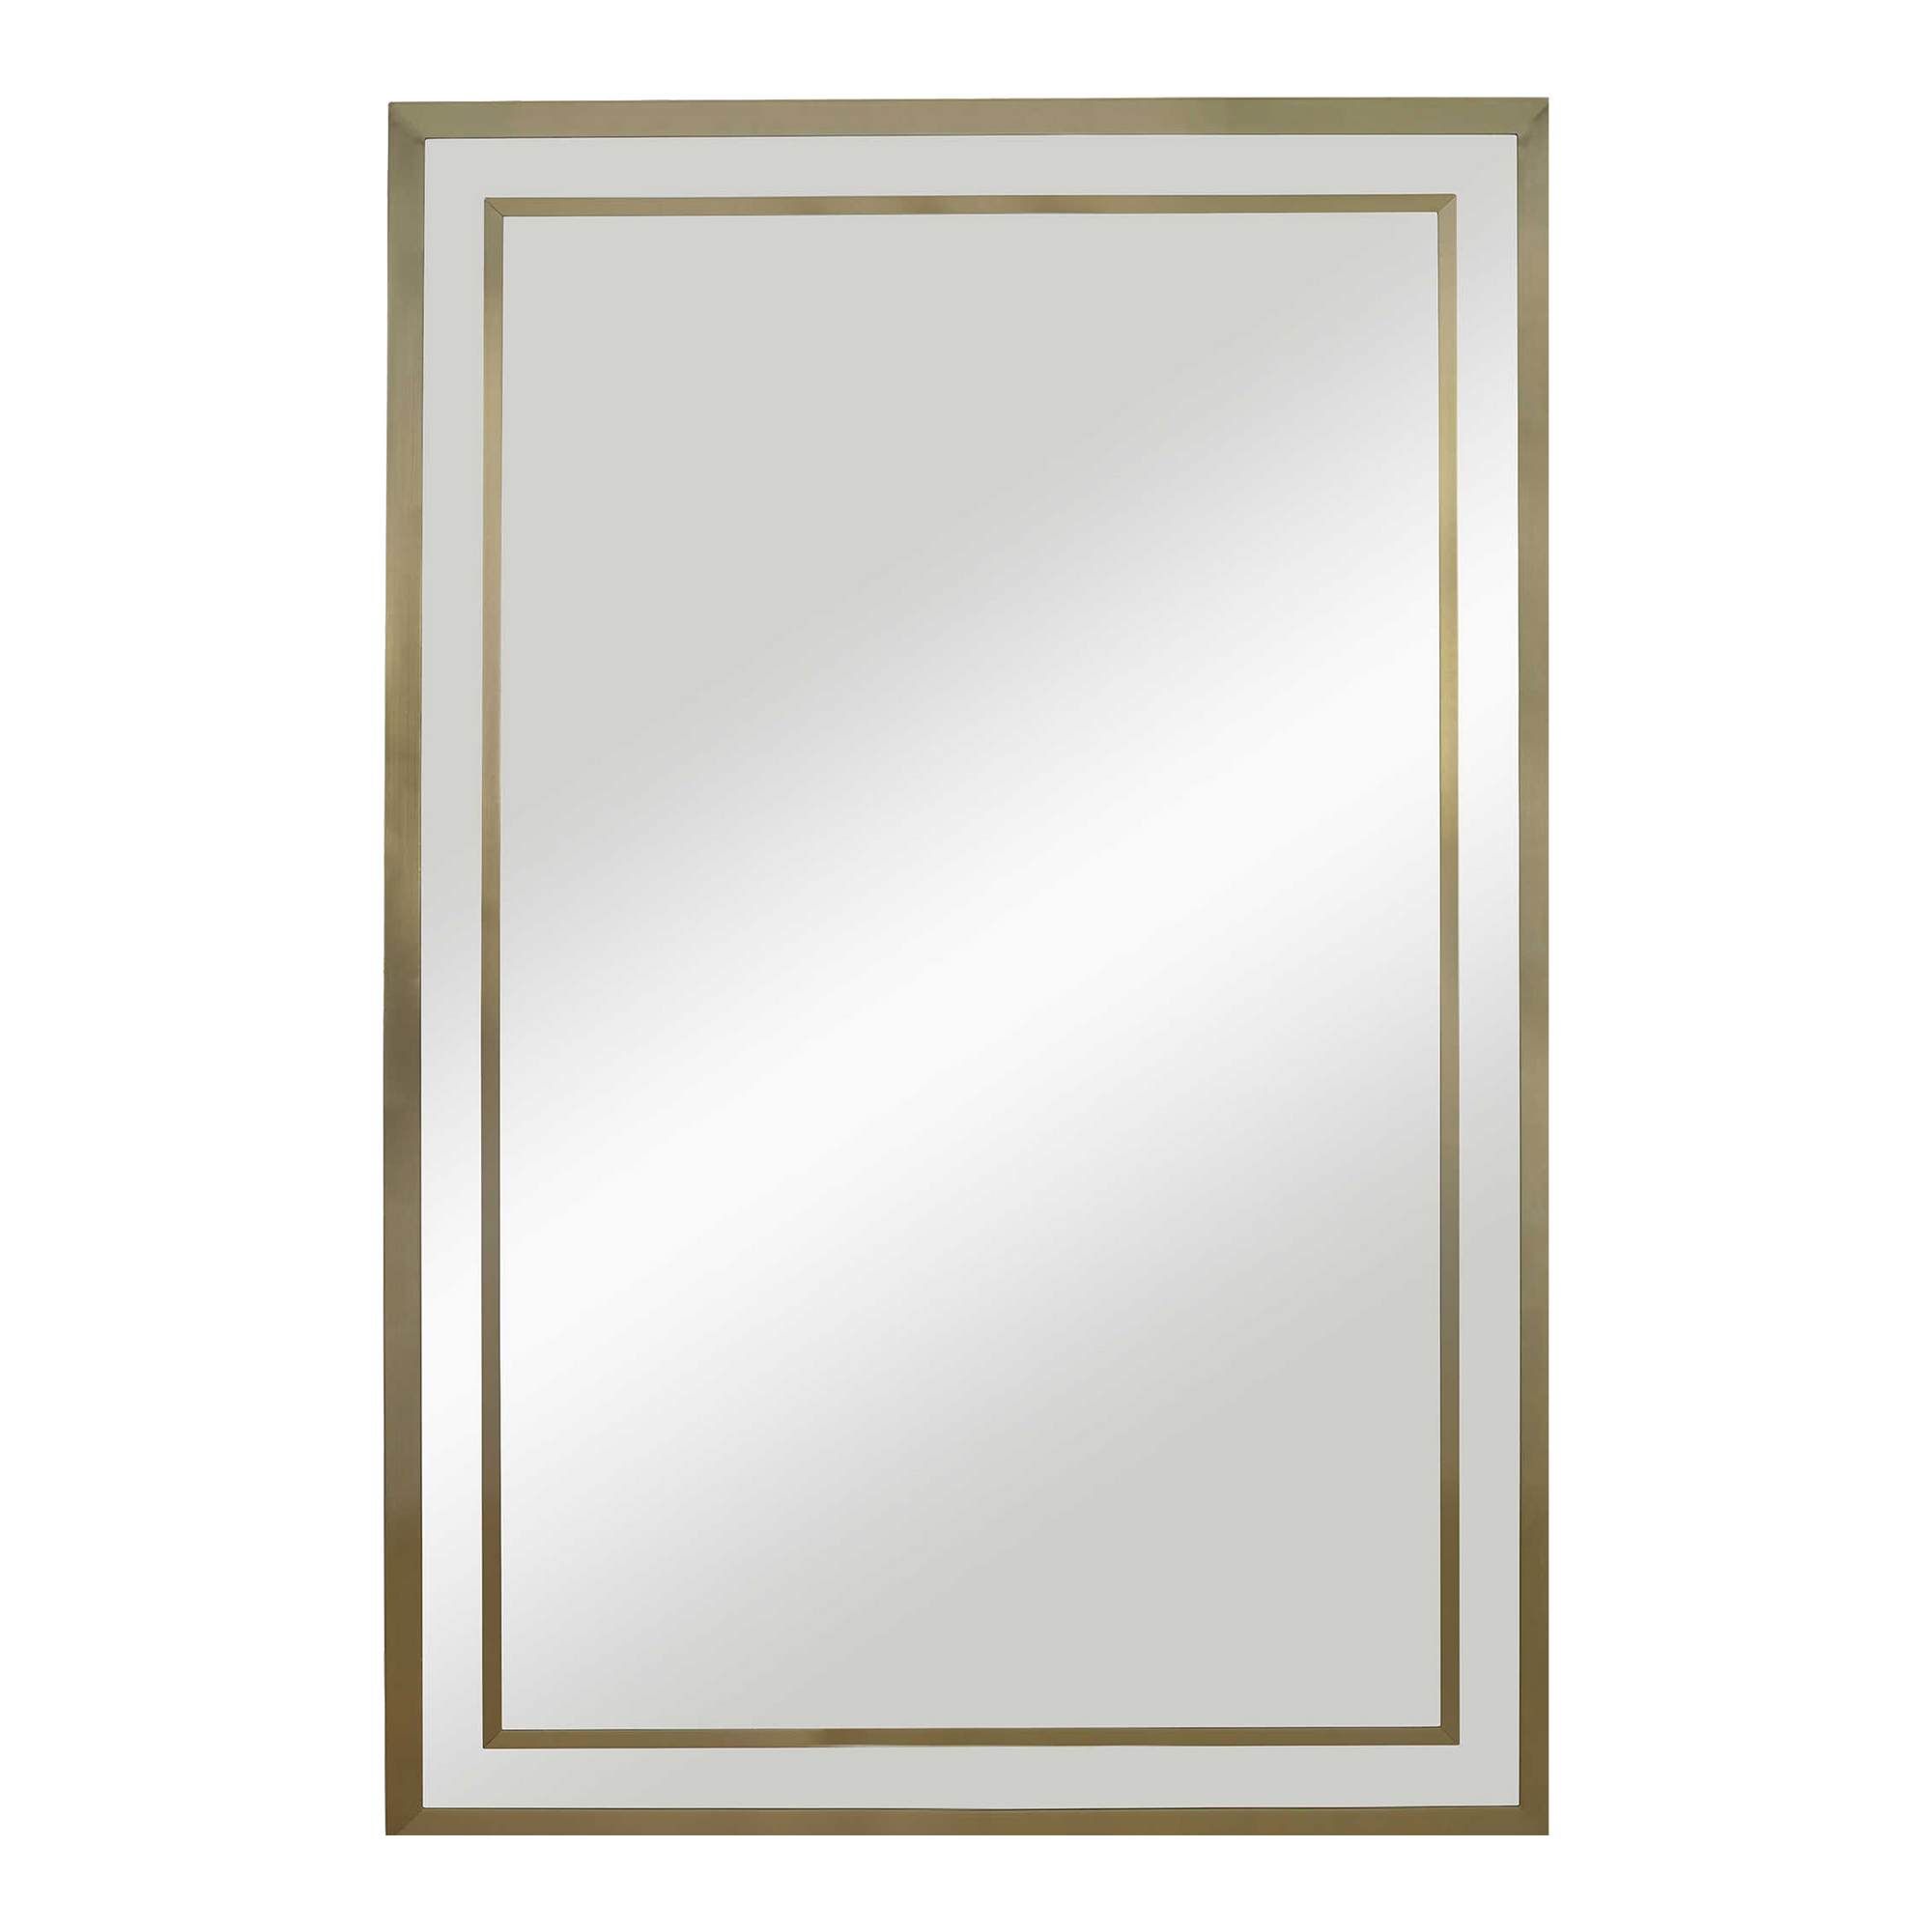 Clean and sophisticated, this mirror is constructed with a stainless steel frame finished in light brushed brass with a matching inner frame.